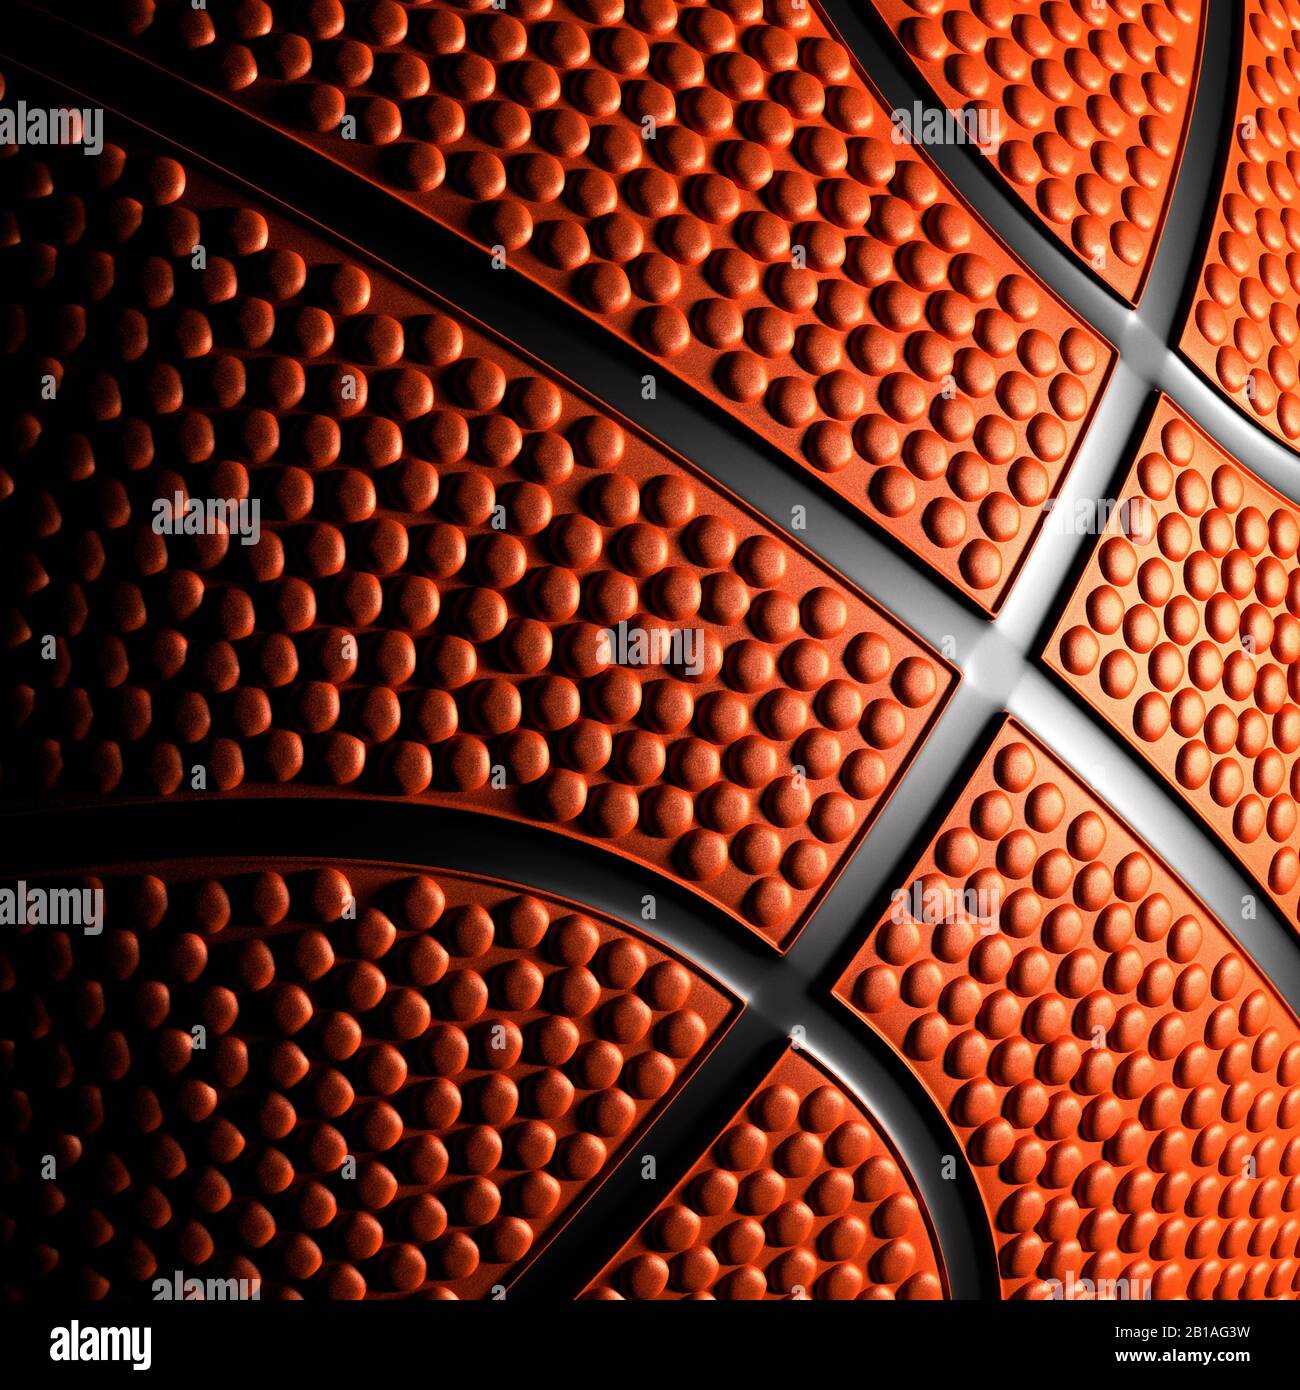 Basketball ball in extreme close up. Abstract pattern. Orange, stripes, texture. Stock Photo